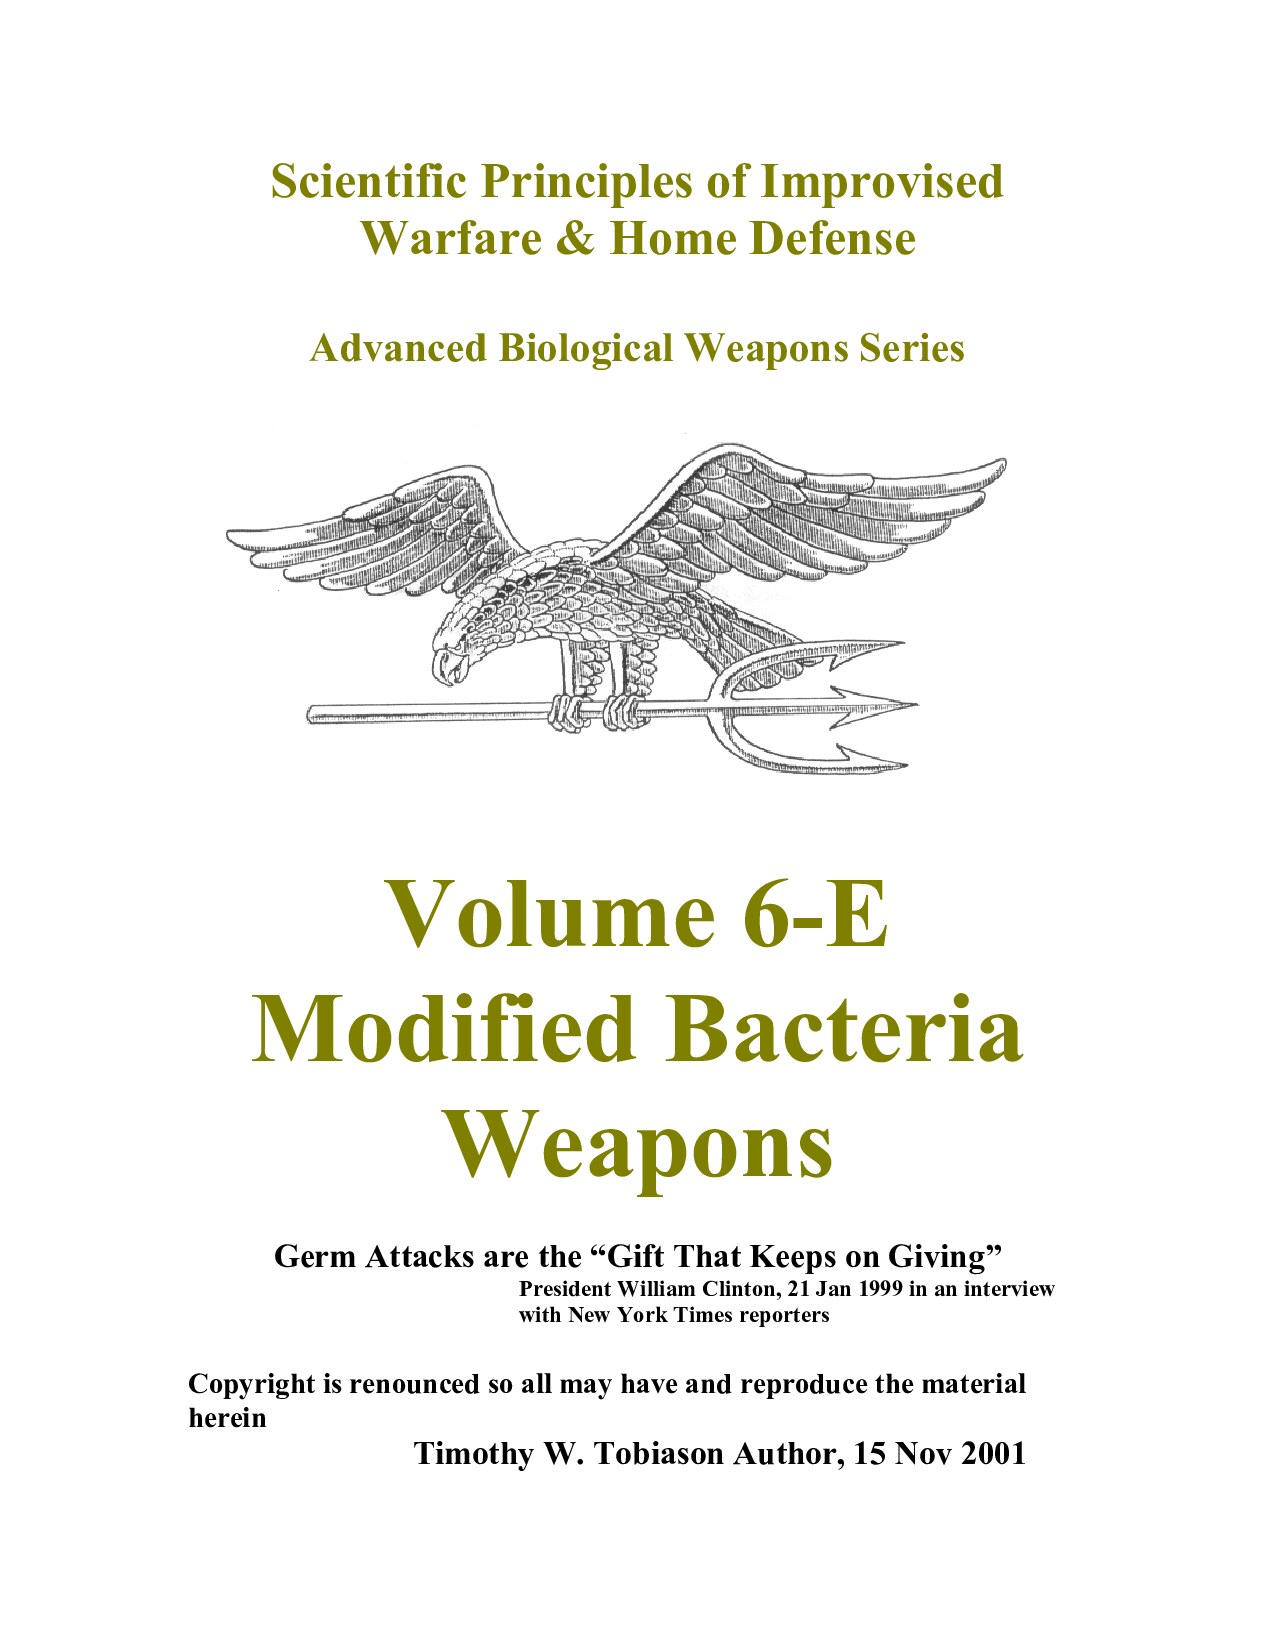 Scientific Principles of Improvised Weapons and Home Defense - Volume 6-E: Modified Bacteria Weapons